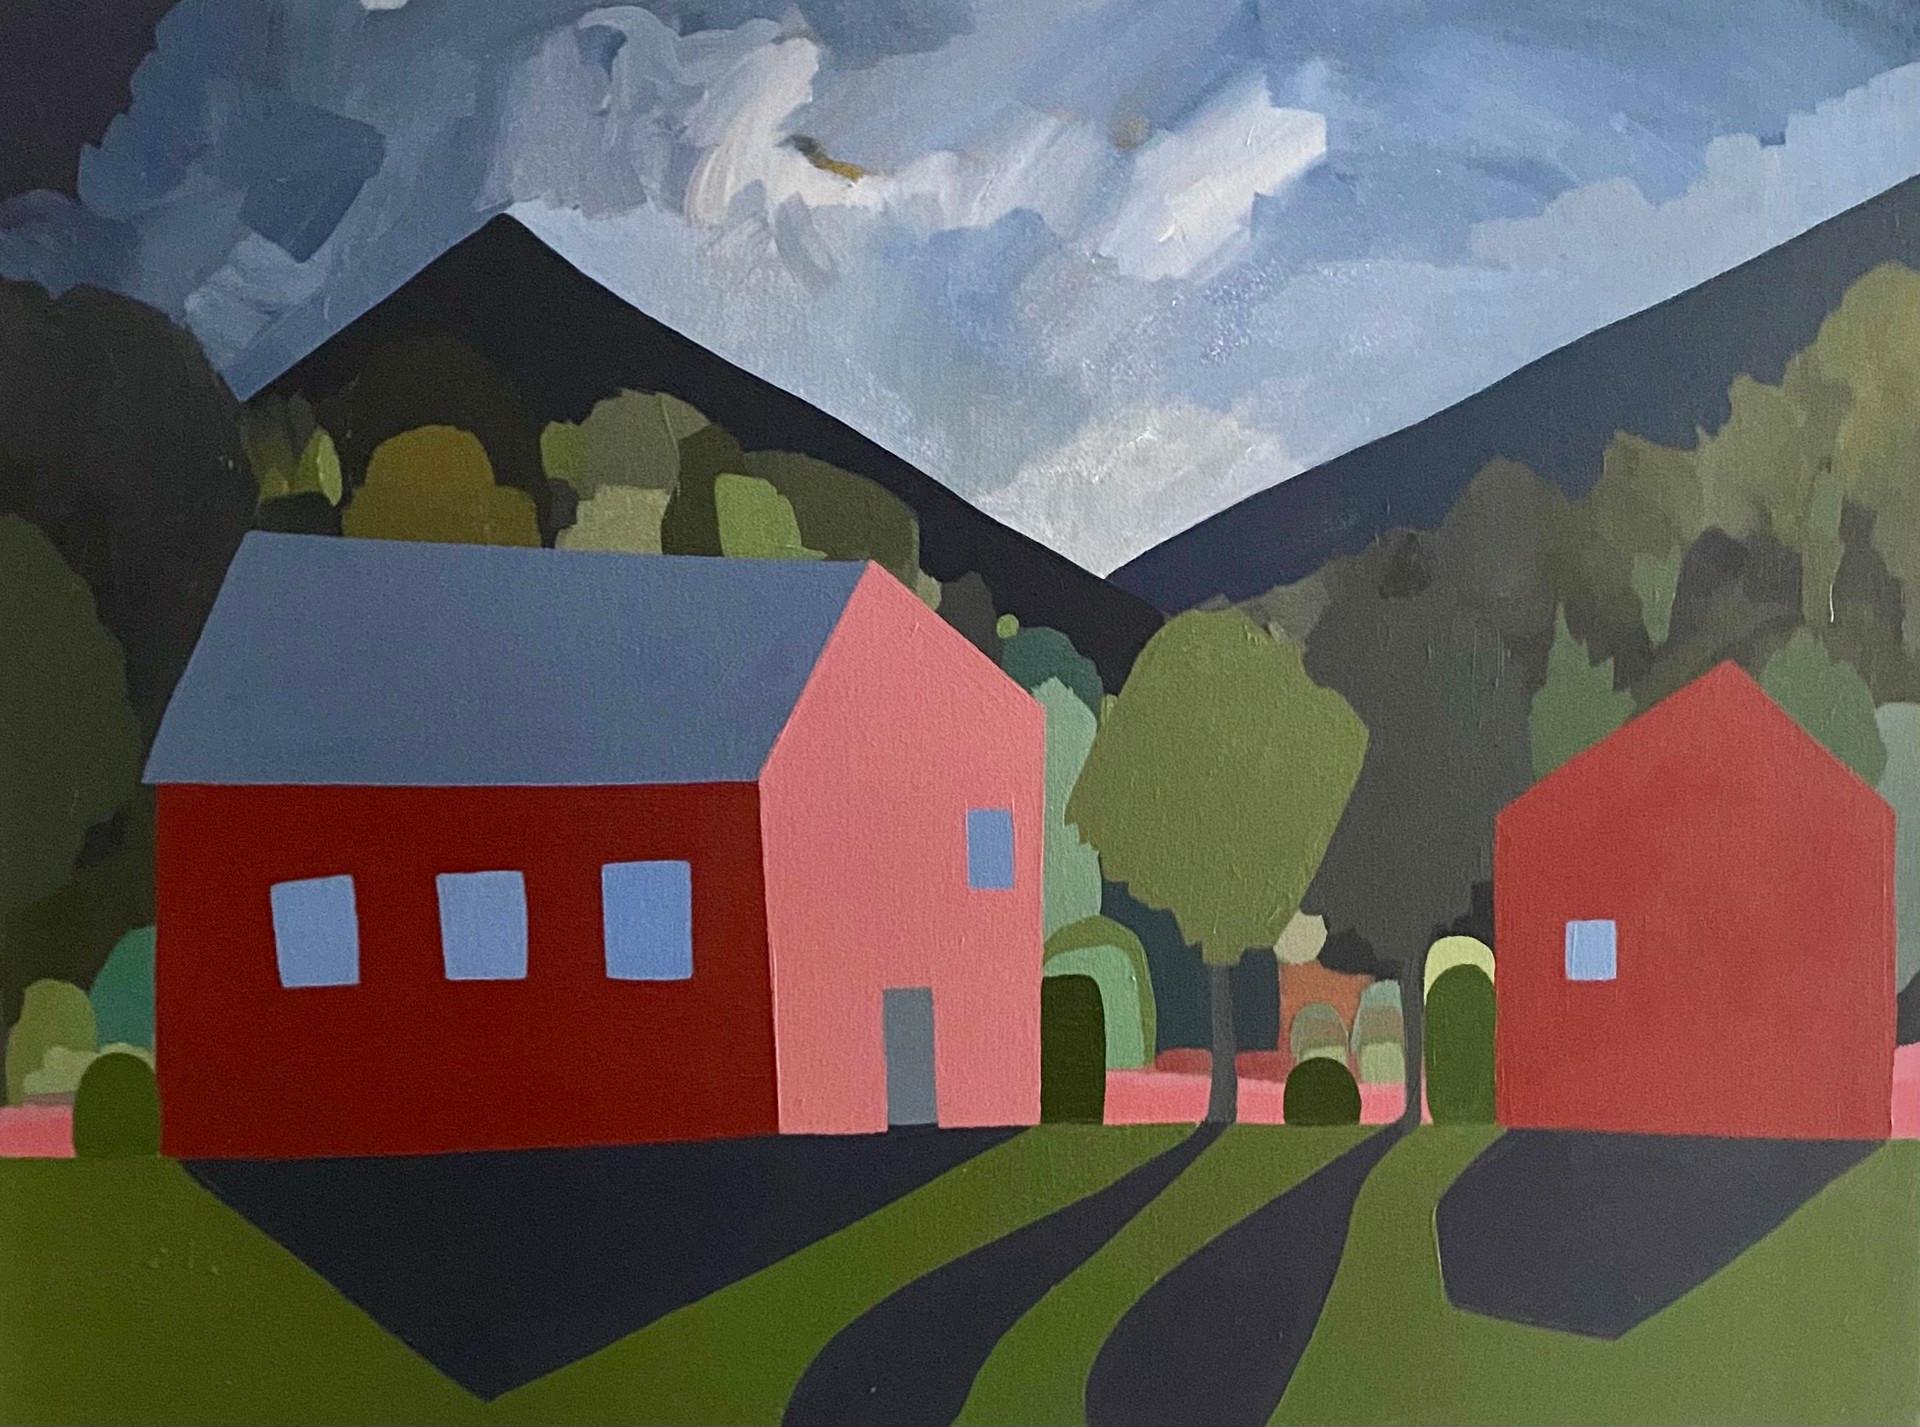 House and Shed in Forest with Two Mountains - Art by Sage Tucker-Ketcham